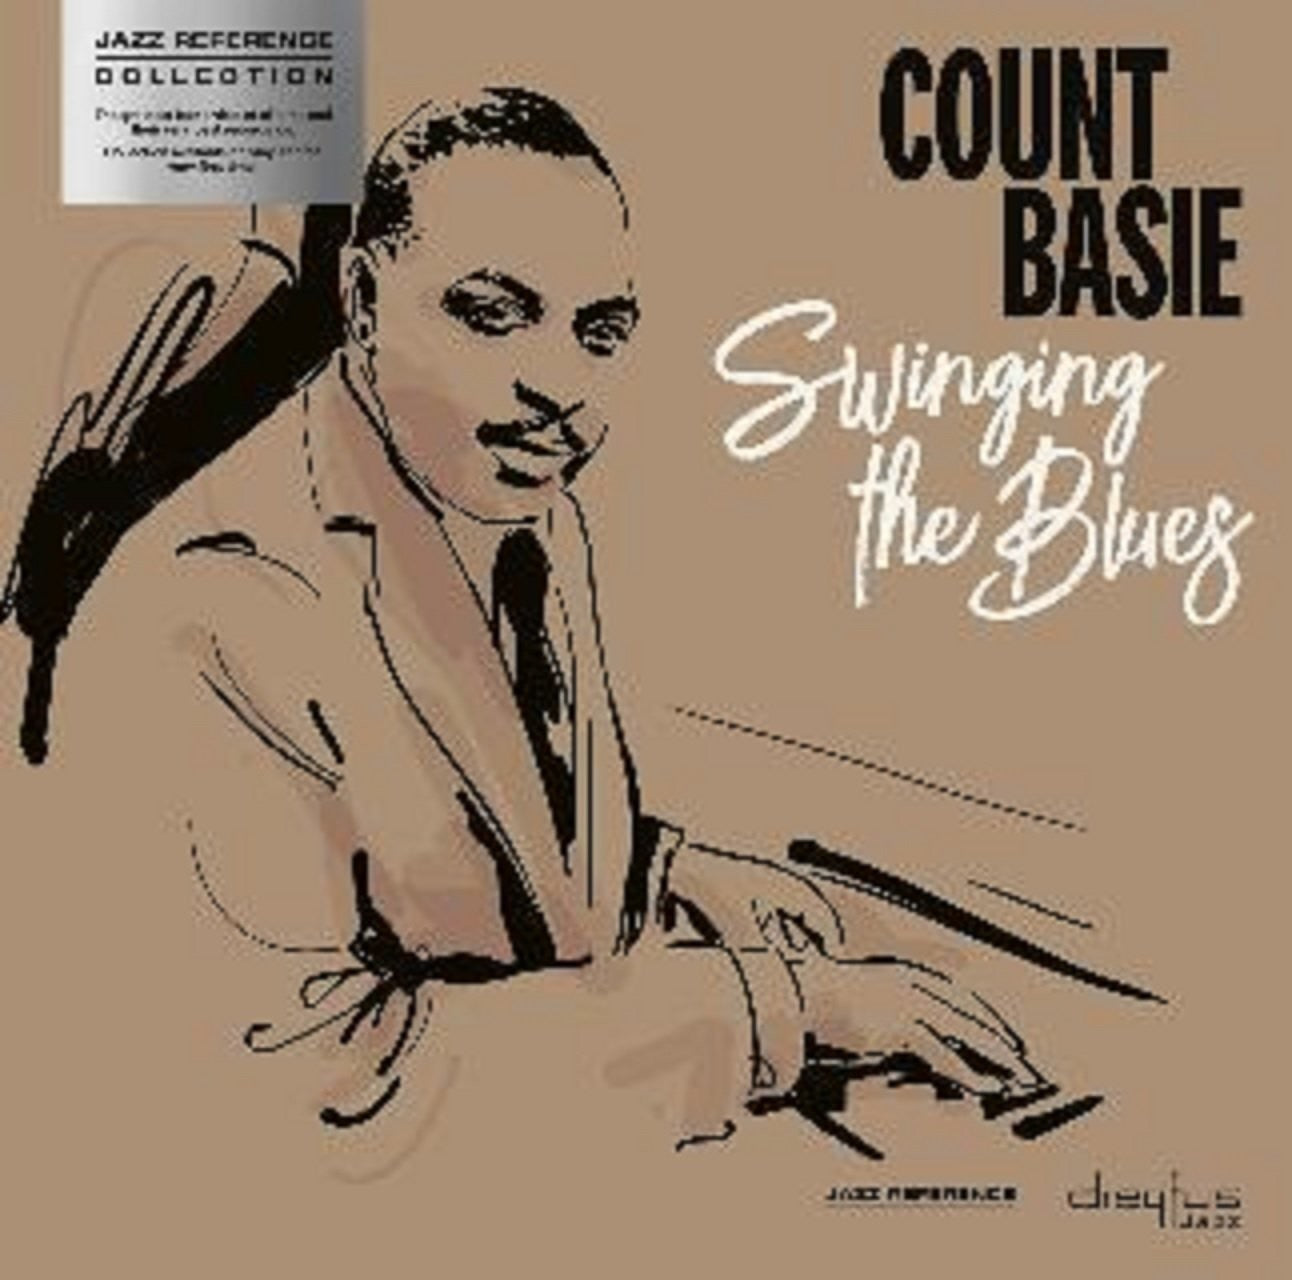 Basie, Count - Swinging the Blues